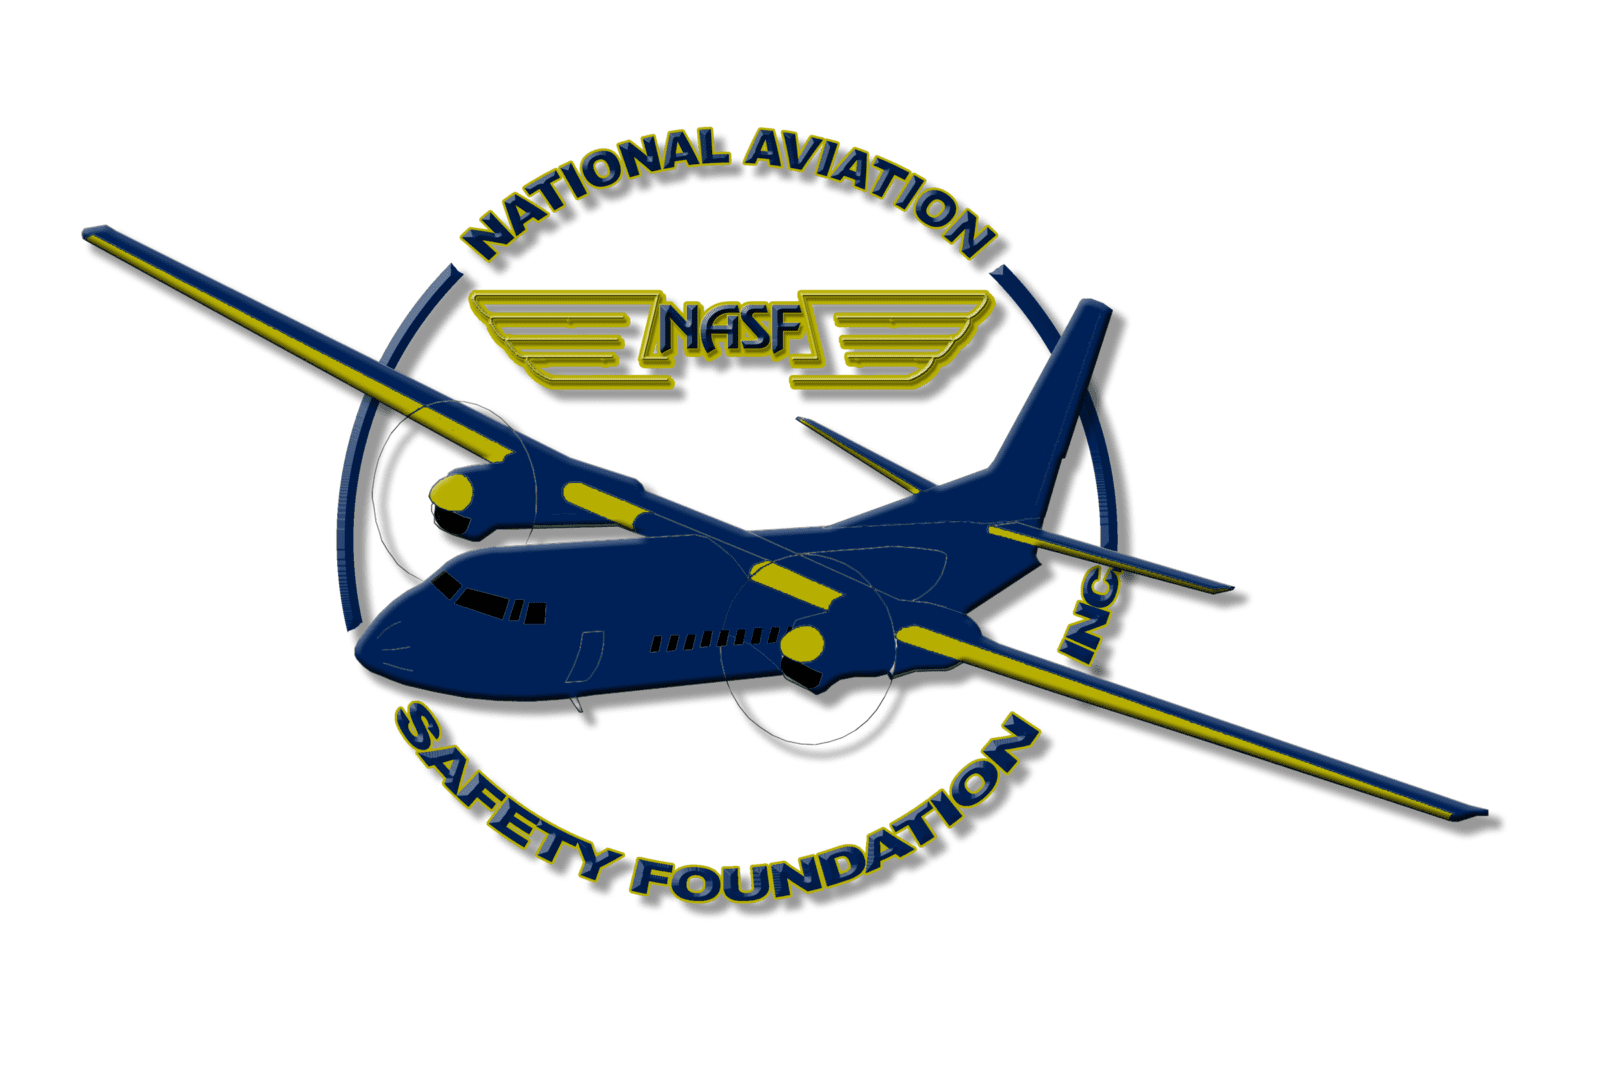 A blue and yellow airplane is in the center of a logo.